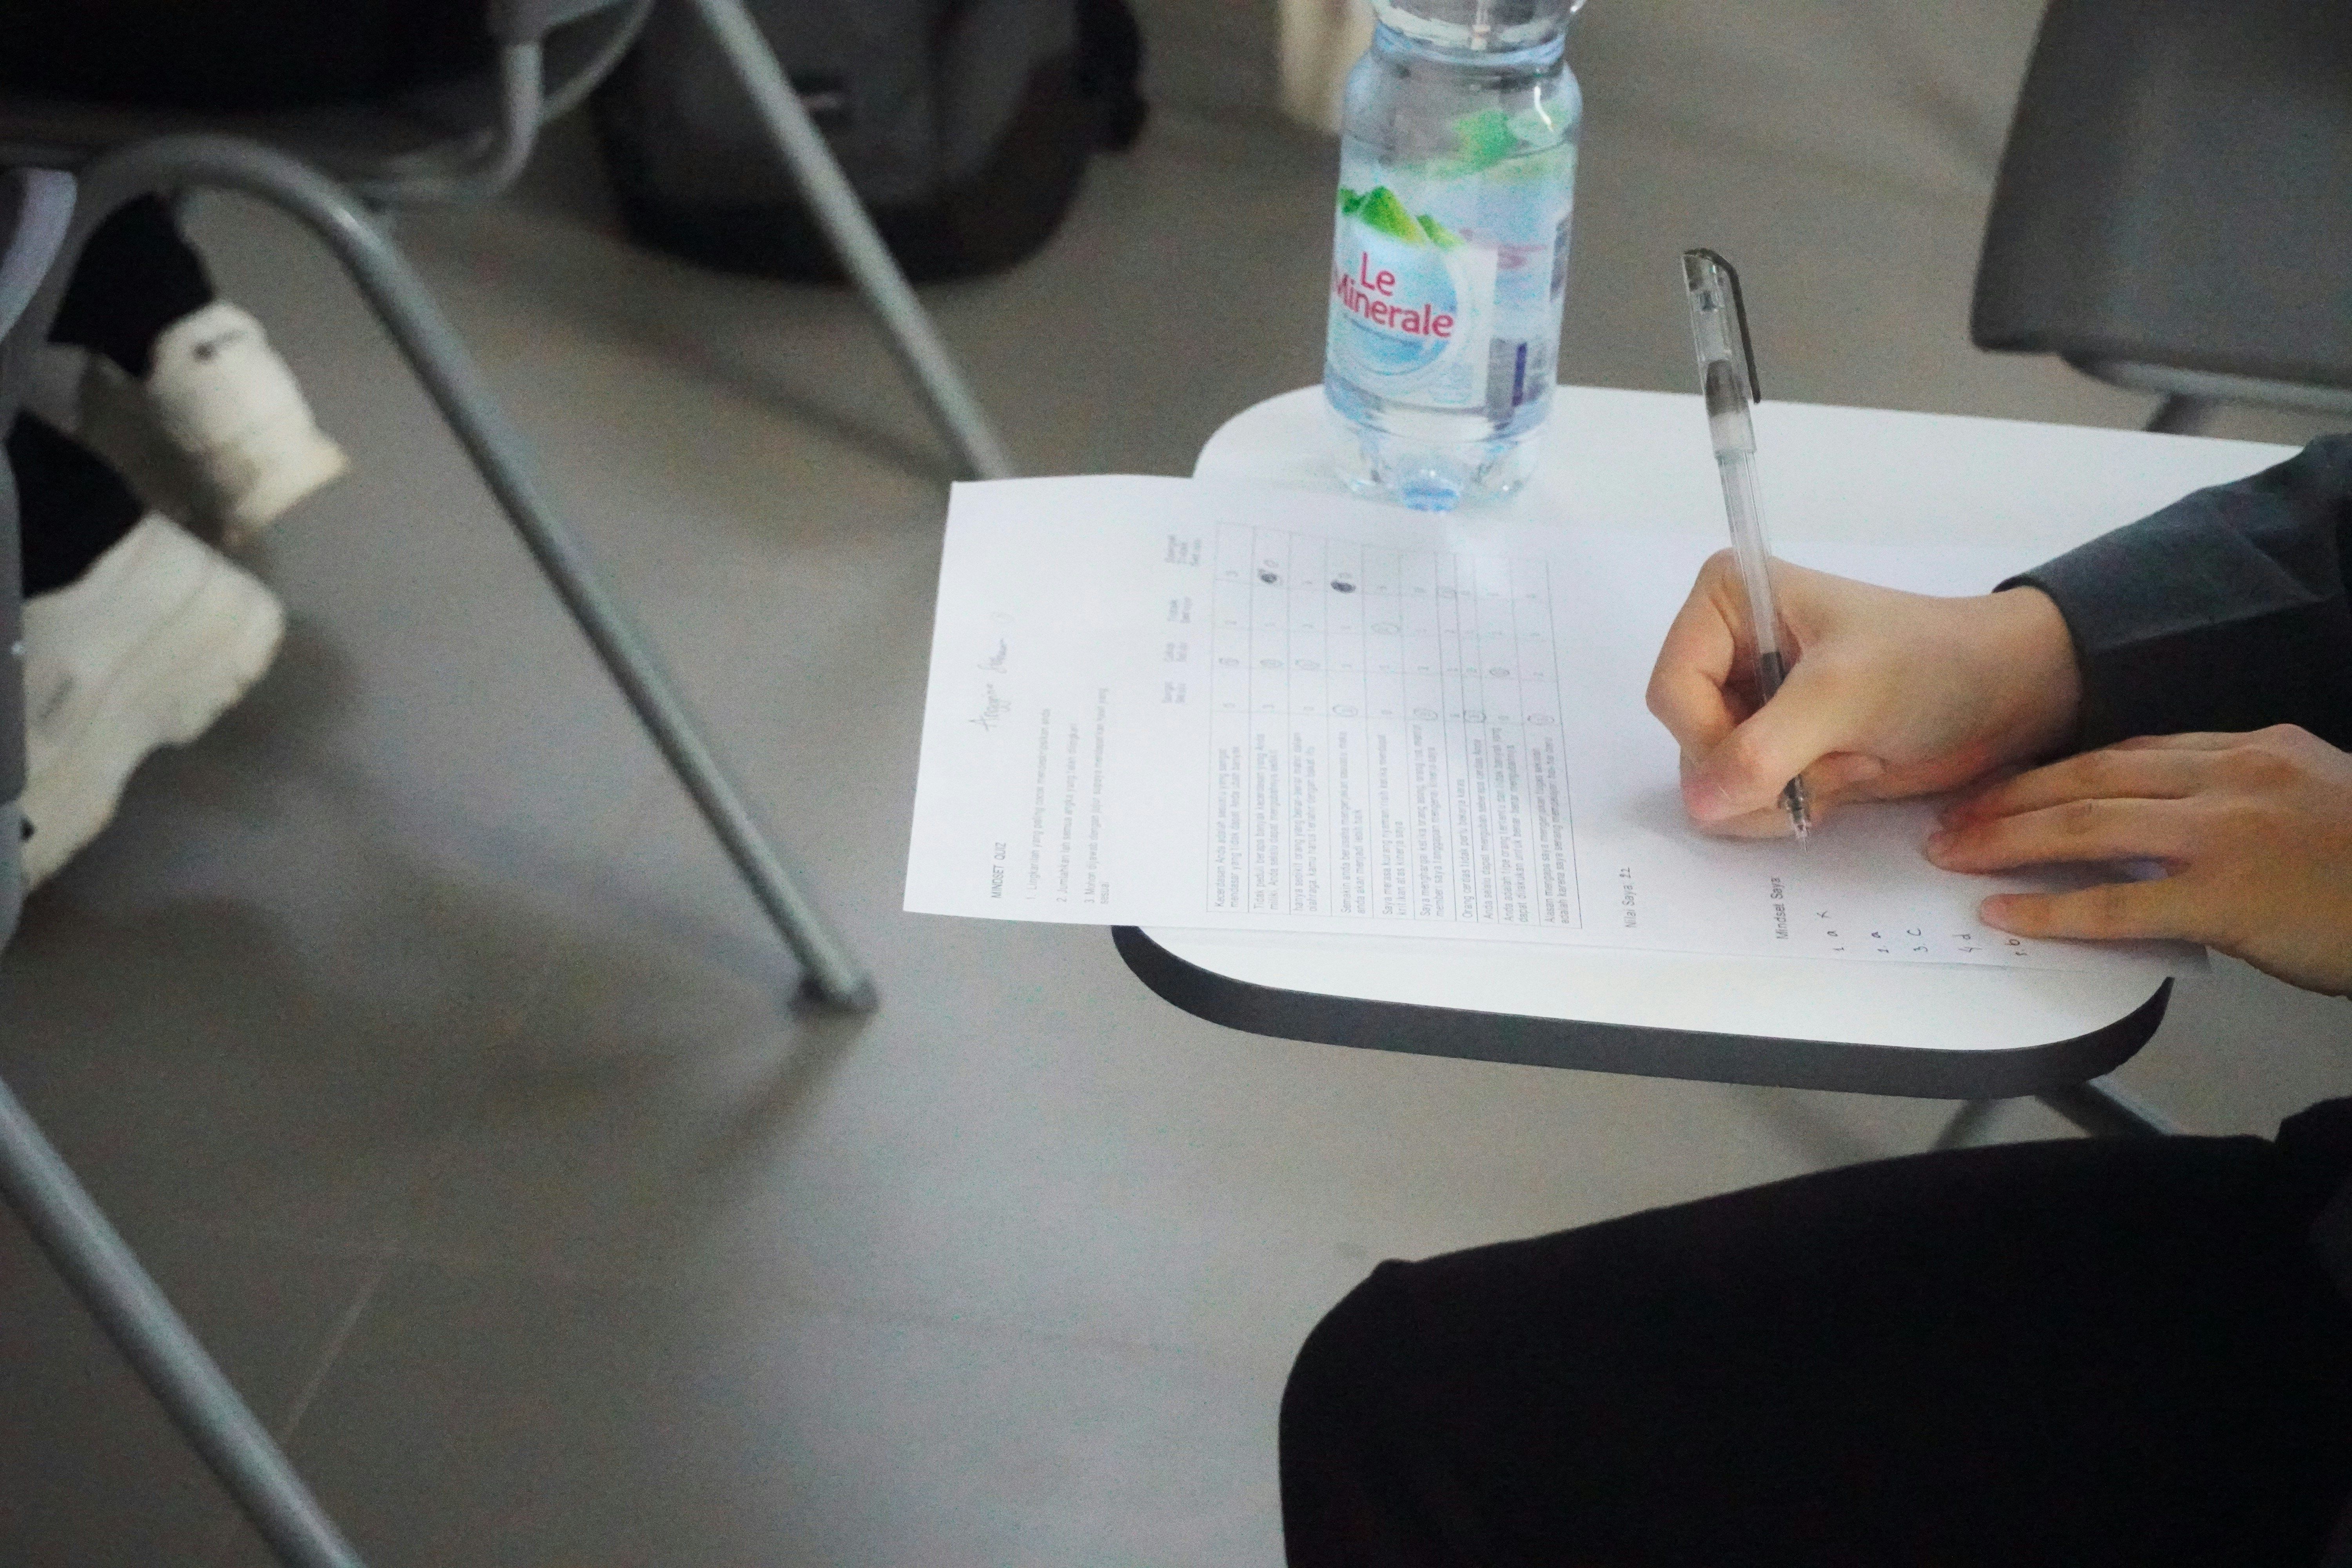 A man attempting an exam in a classroom on a piece of paper using a ball point pen with a water bottle next to her.